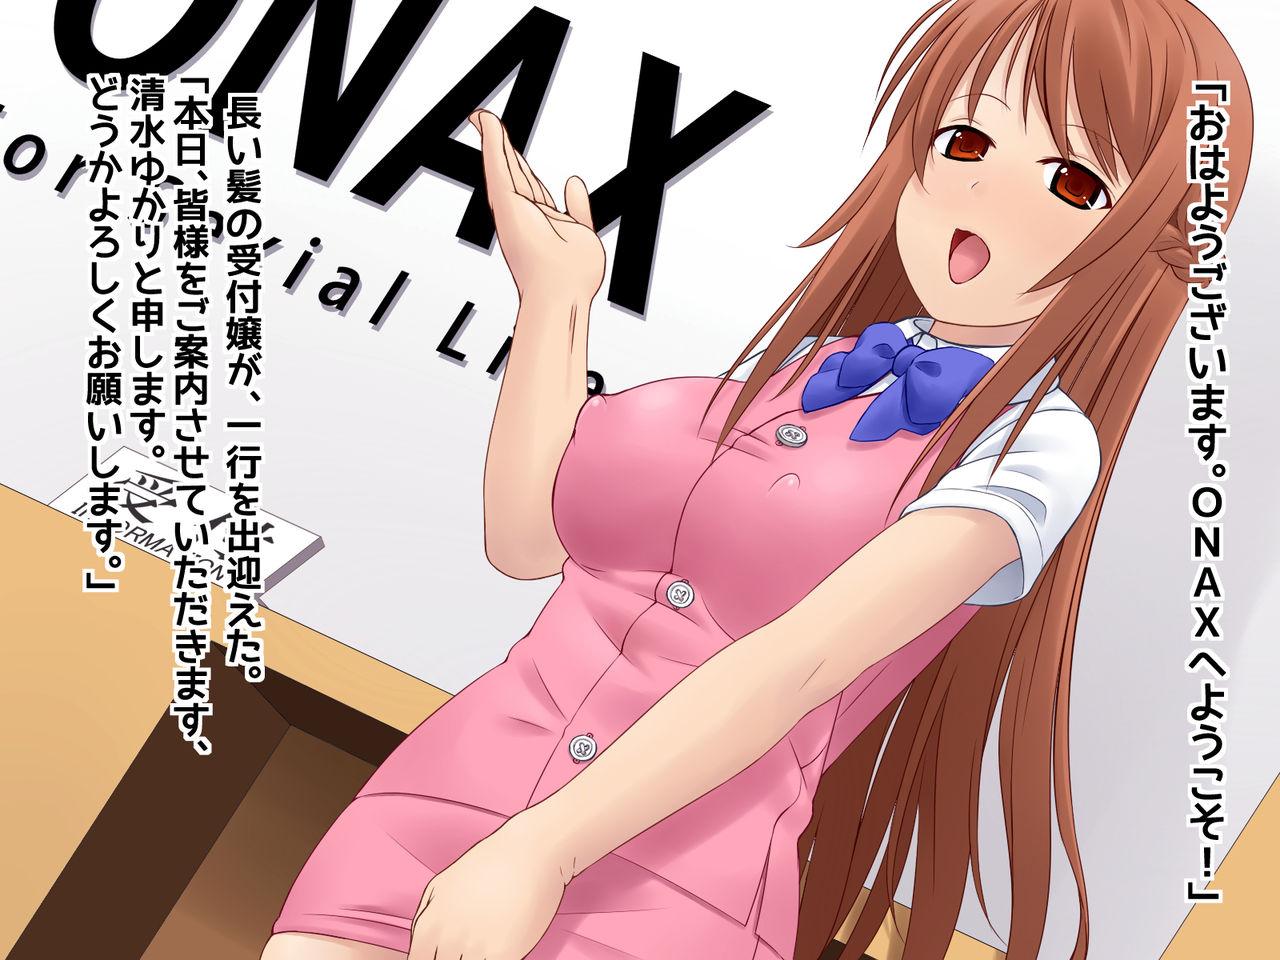 I ... become a meat urinal! Poor females are fallen into a semen processing hole and happy ending ♪ 1